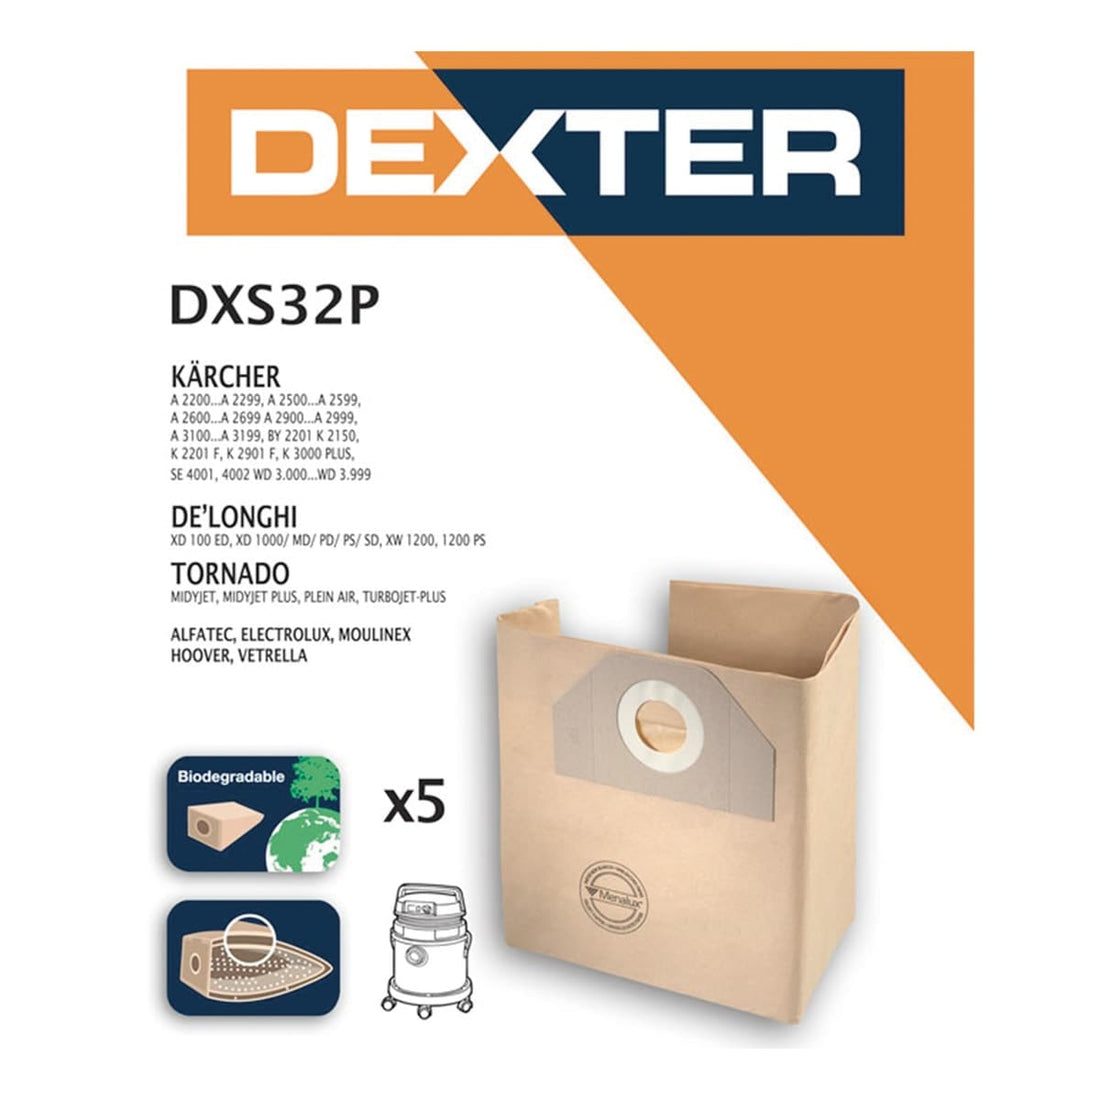 DEXTER BAGS FOR A2200 WD3300, 5 PIECES - best price from Maltashopper.com BR400800120